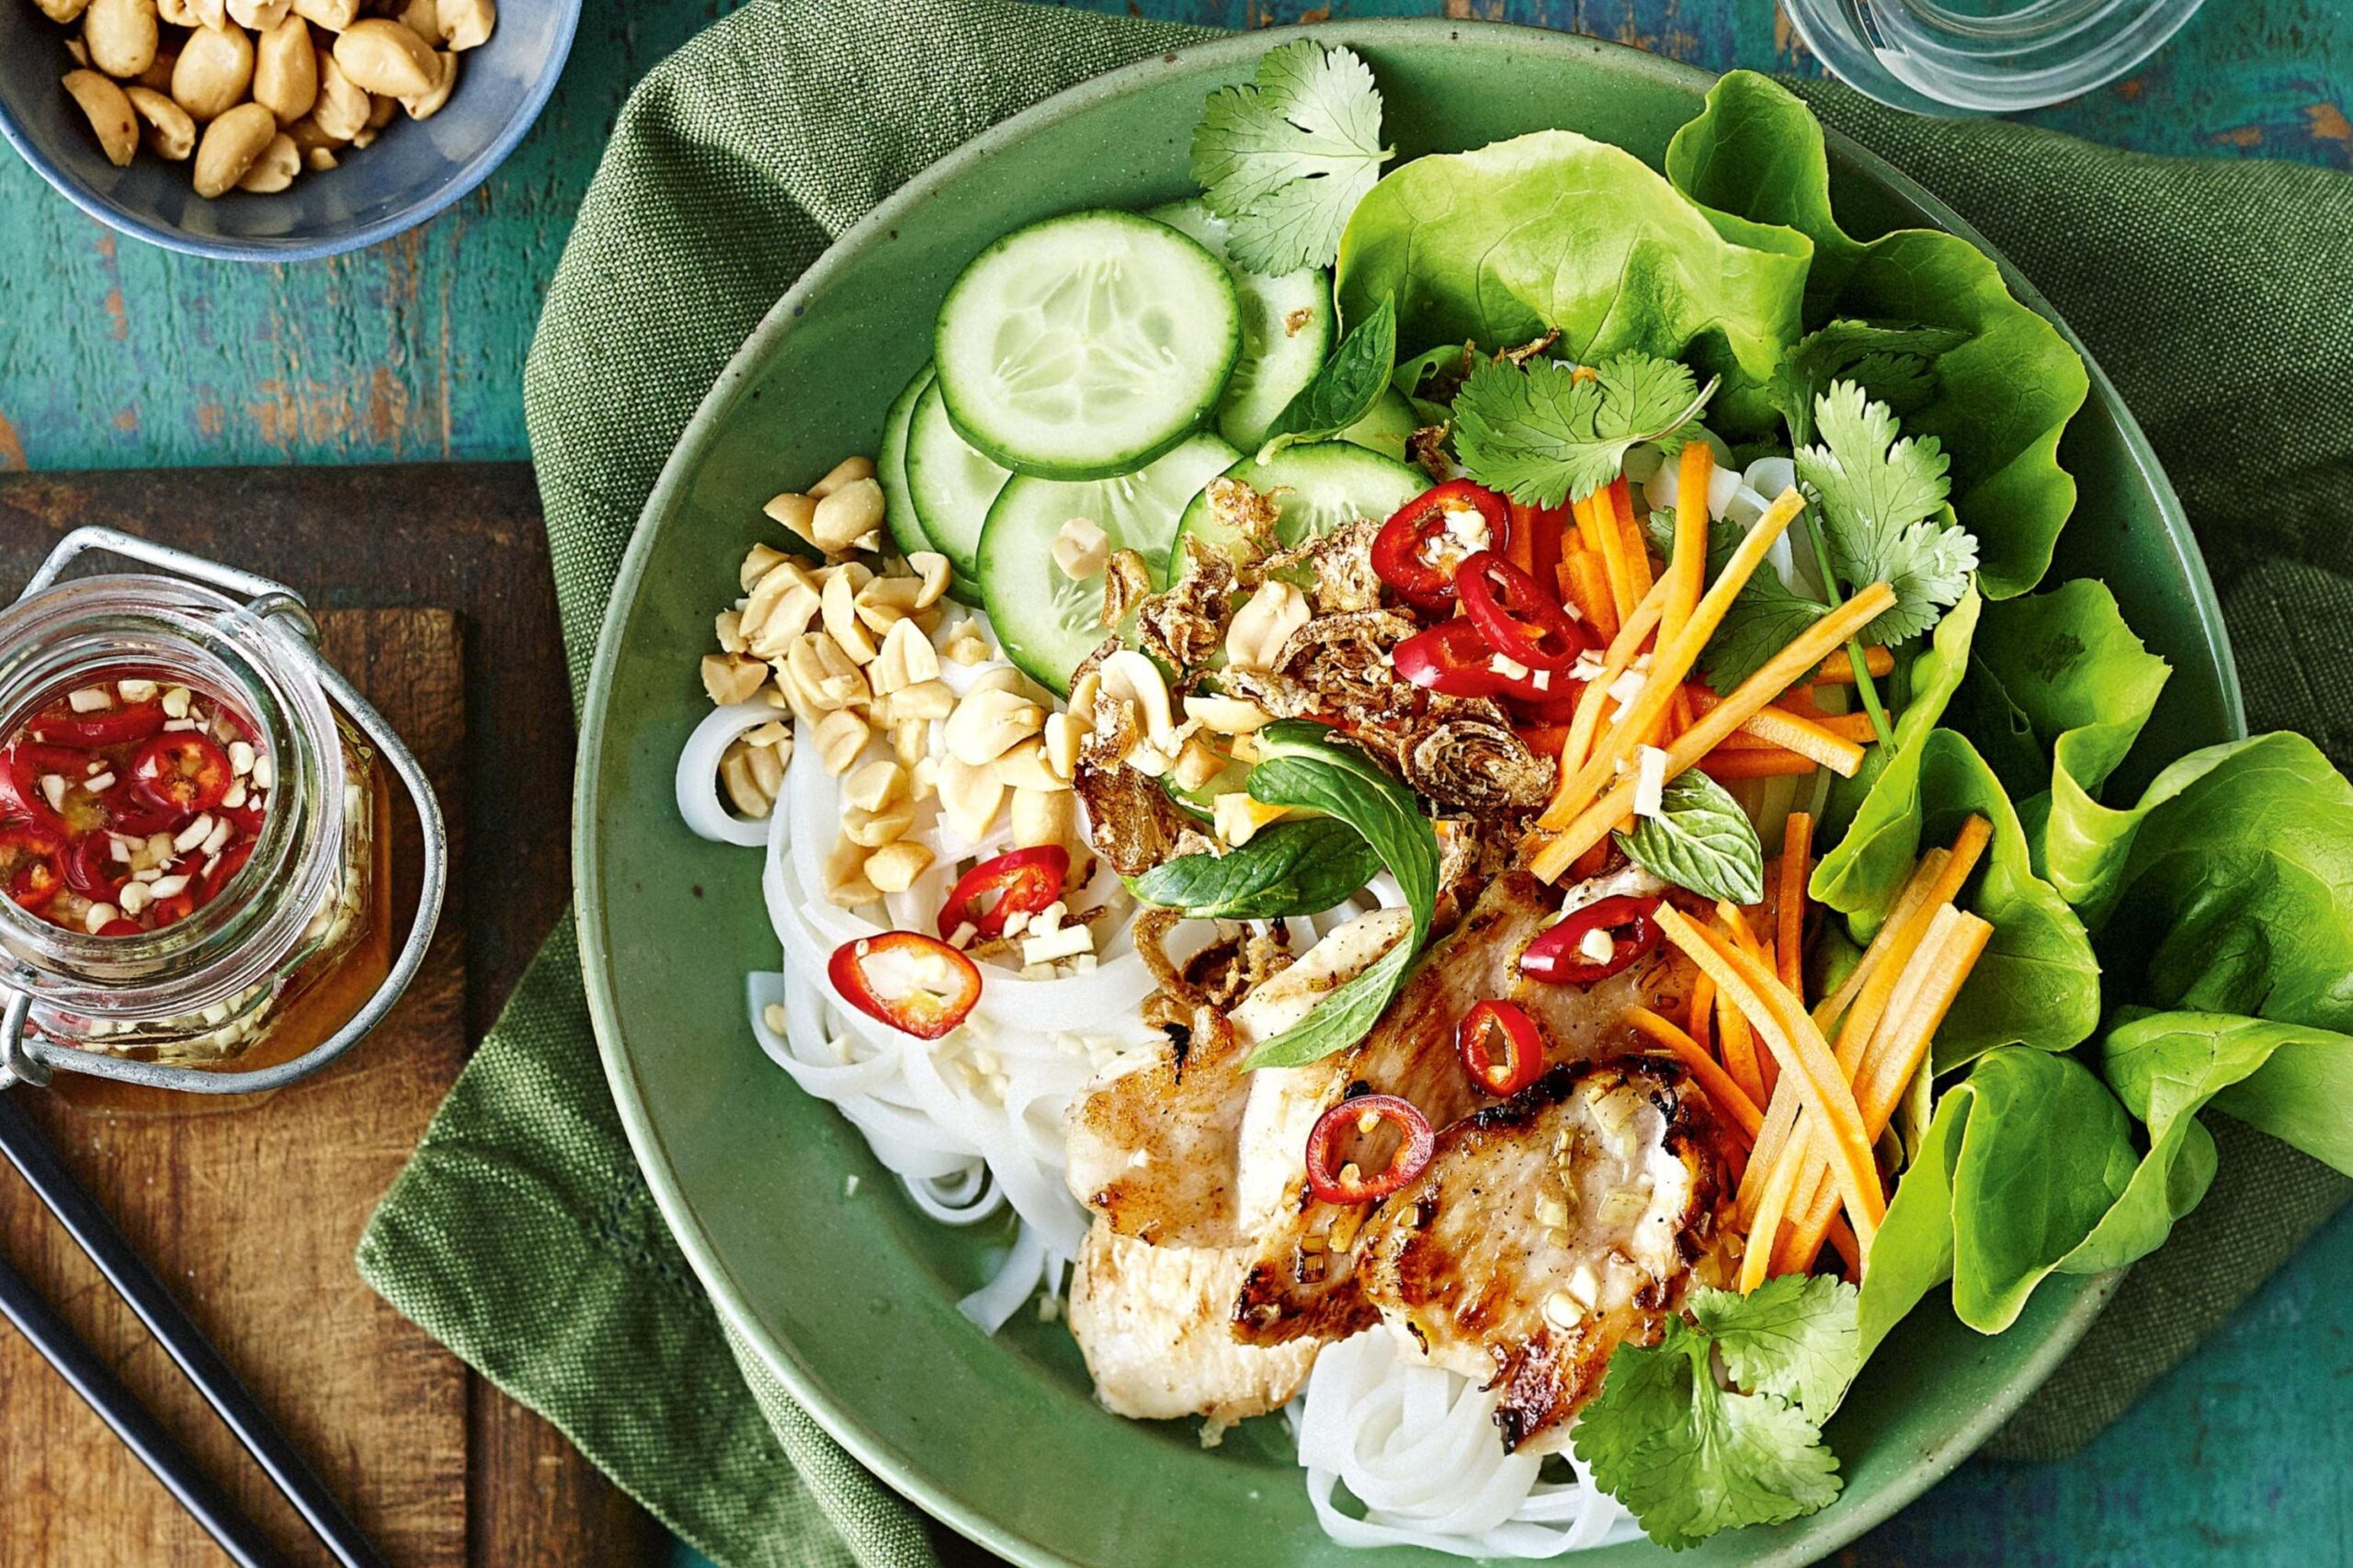  A salad that doesn't skimp on the protein